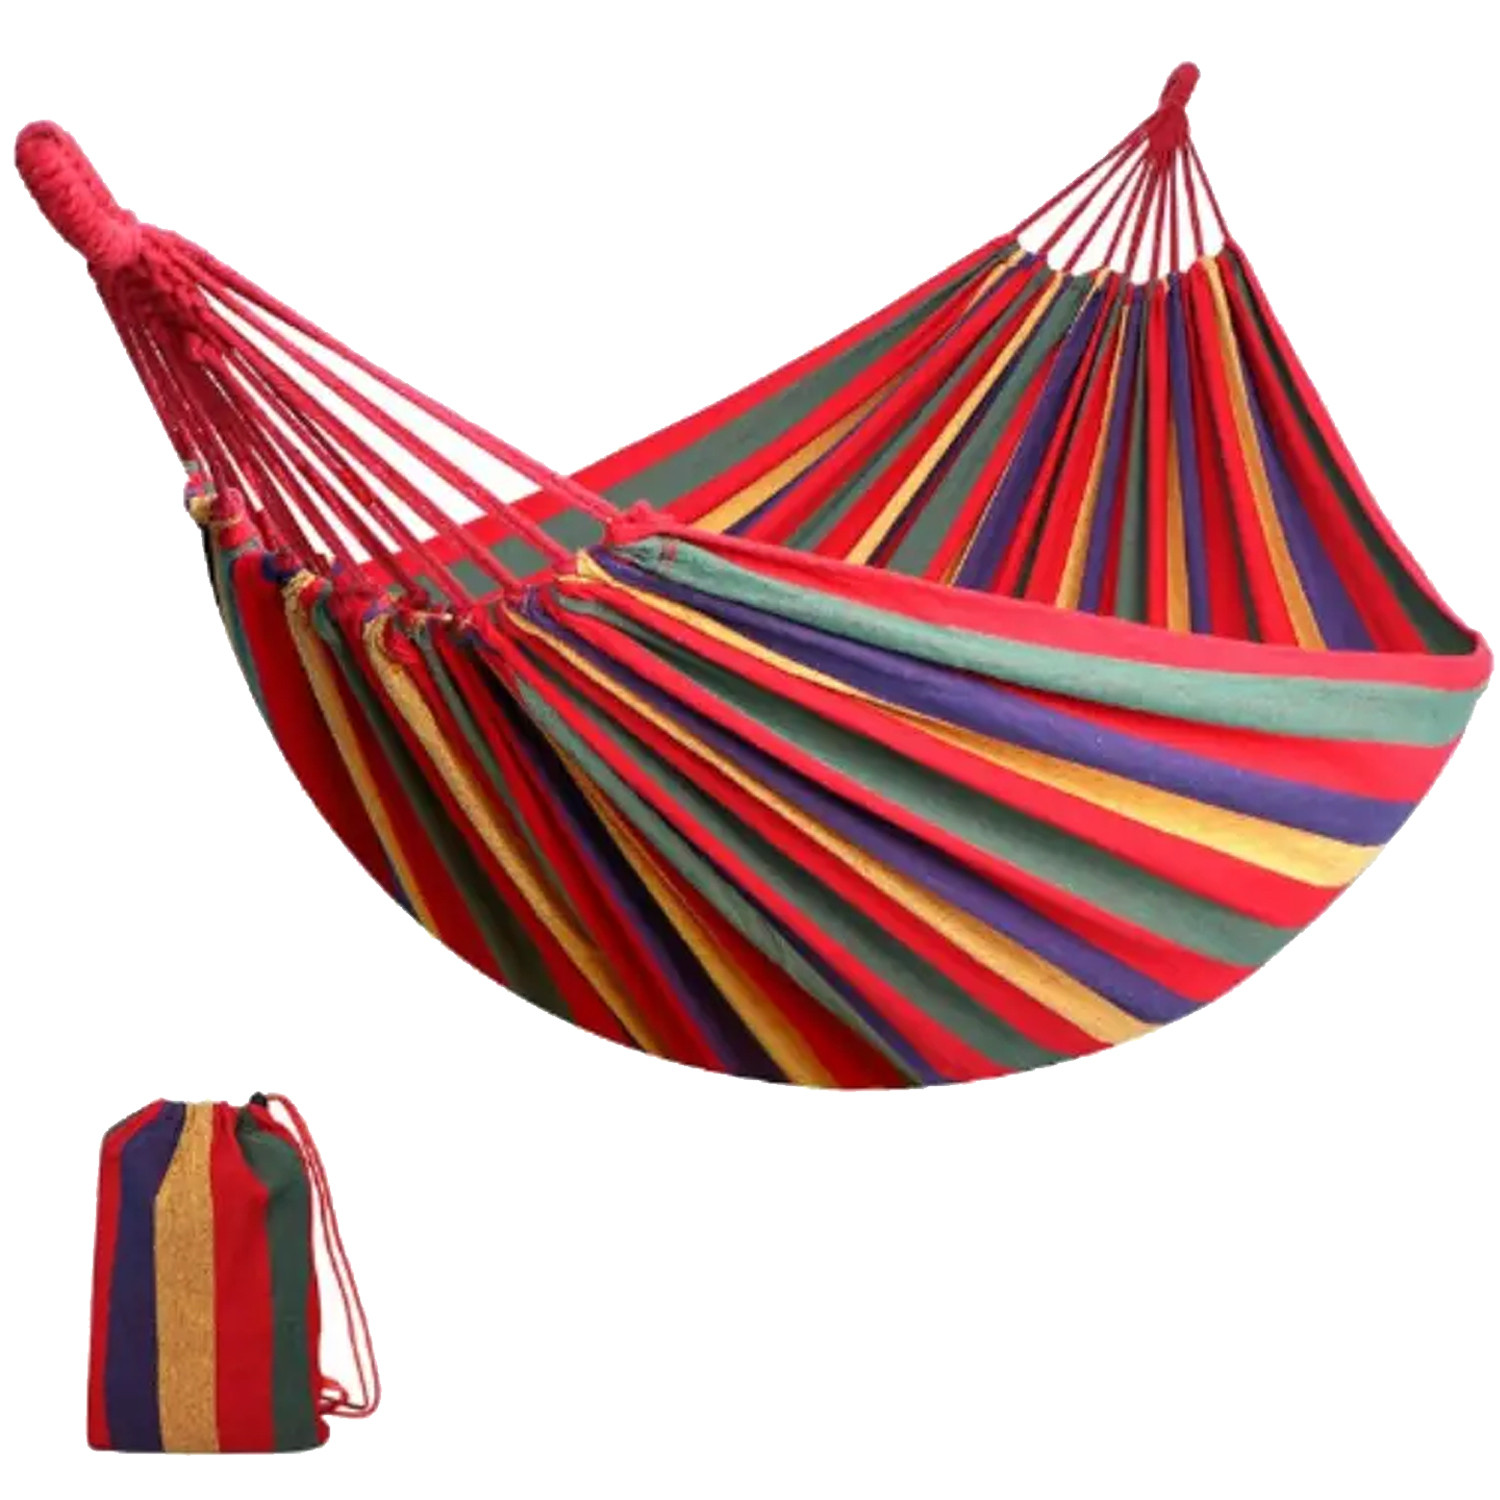 Kuber Industries Canvas Travel Hammock |Garden Hammock Swing For Adults|160 KG Load Bearing Capicity|Including 2 Rope, 1 Bag (Red & Yellow)